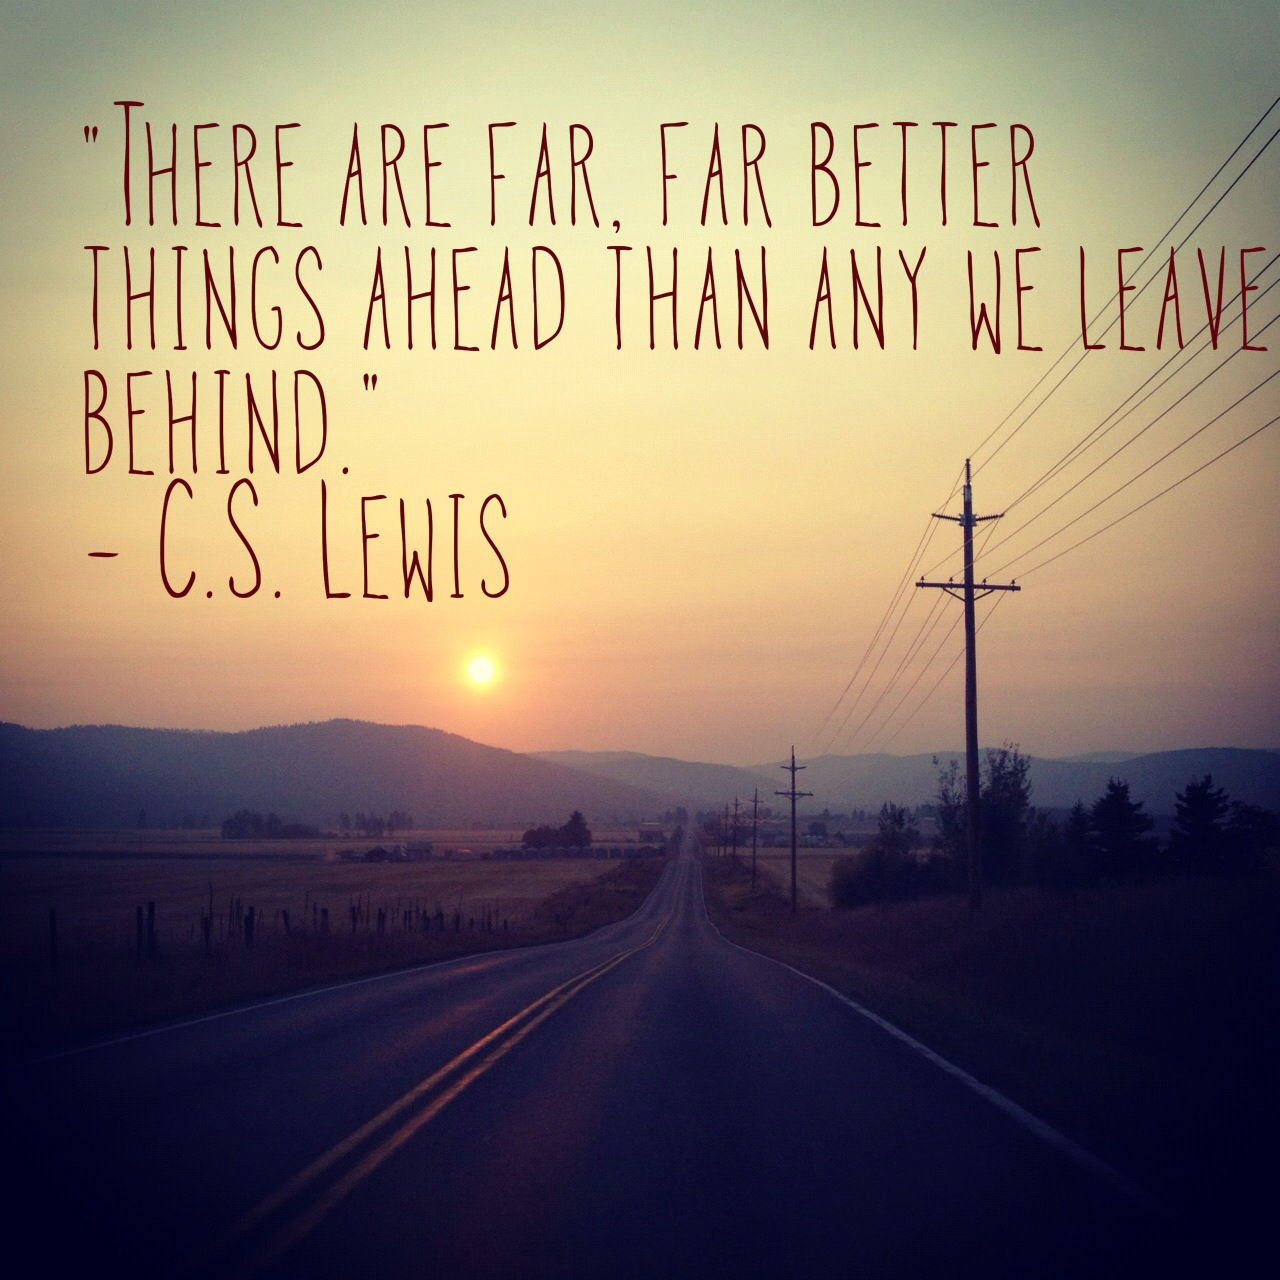 Cs Lewis Quotes On Life
 There Are Far Far Better Things Ahead Than Any We Leave